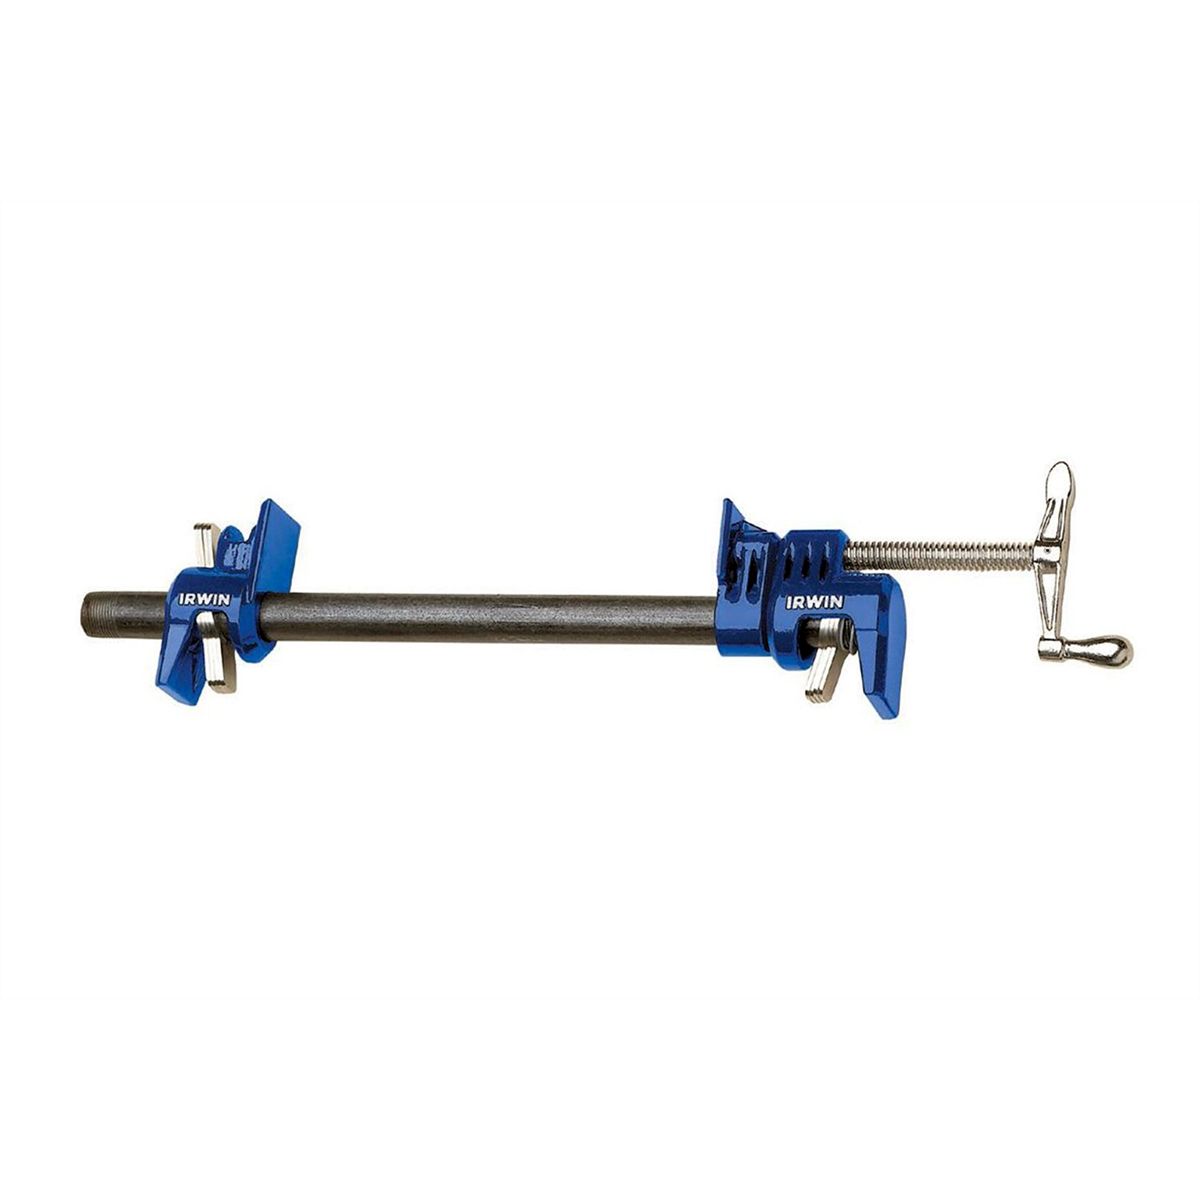 3/4" PIPE CLAMP